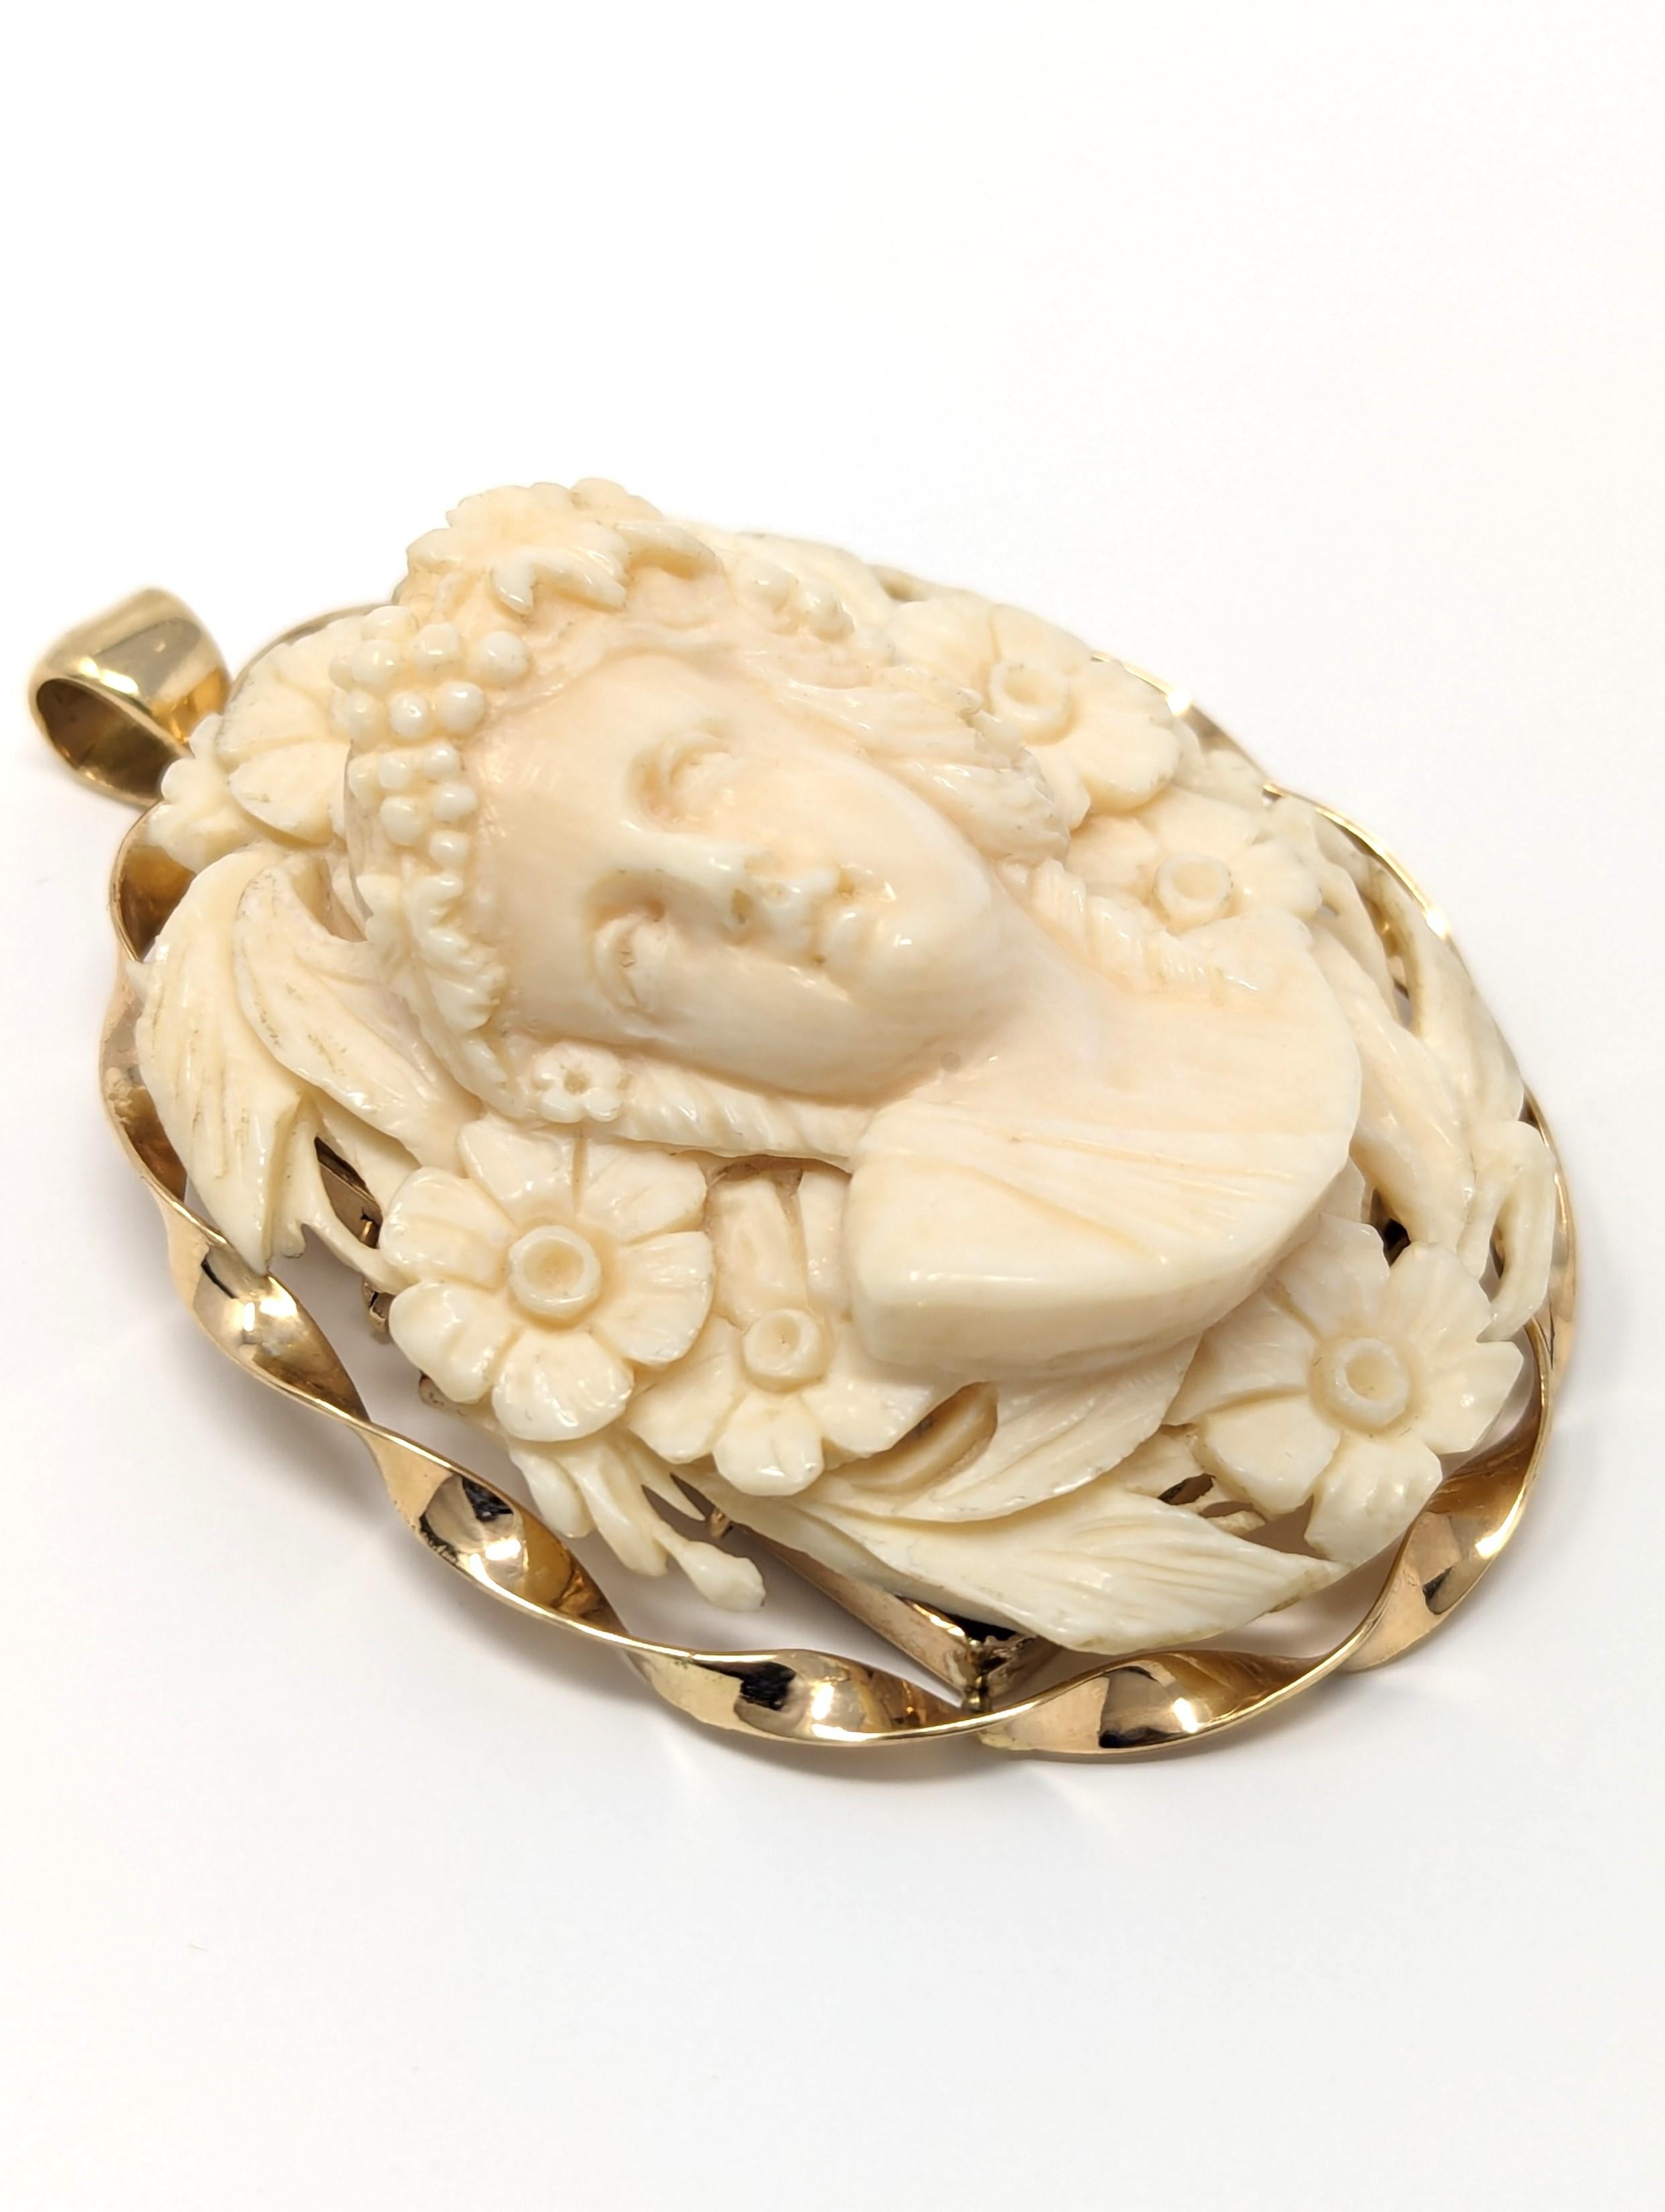 Victorian Antique 14k Hand Carved Bone Cameo Pendant Brooch High Relief Solid Yellow Gold For Sale